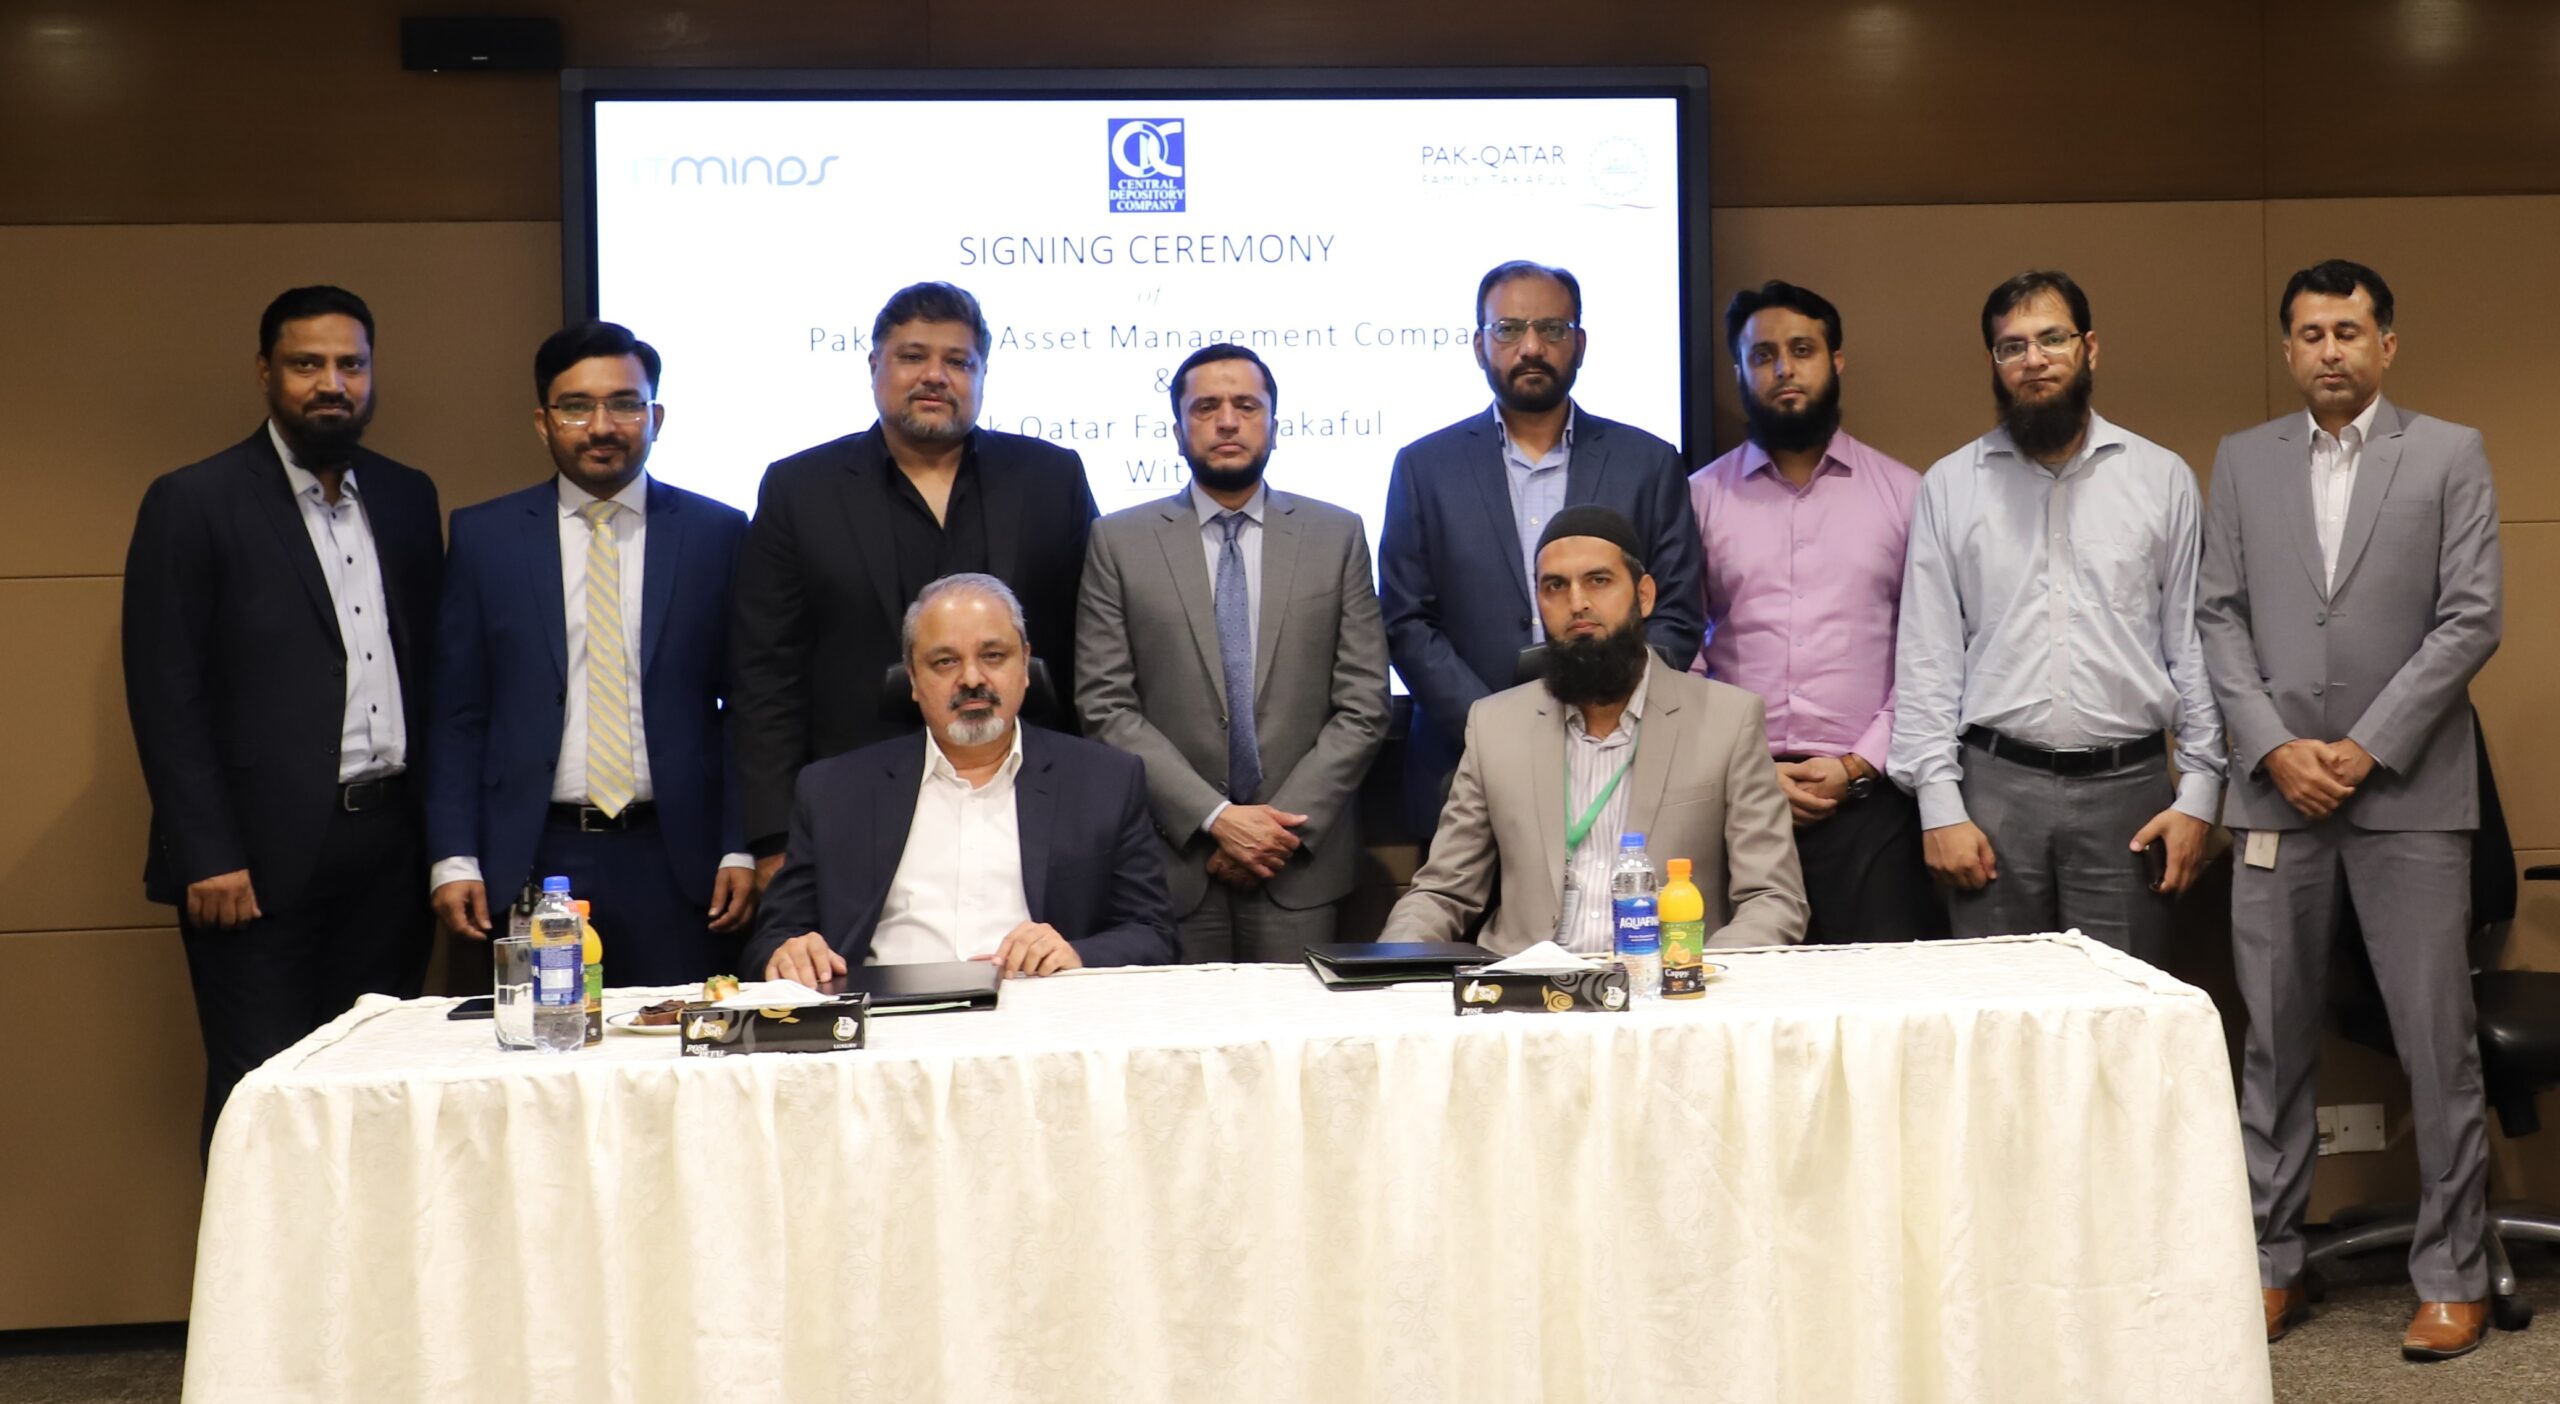 CDC ITMinds Limited signs an agreement with Pak Qatar Asset Management Company Limited and Pak Qatar Family Takaful Limited for Back Office service provisioning